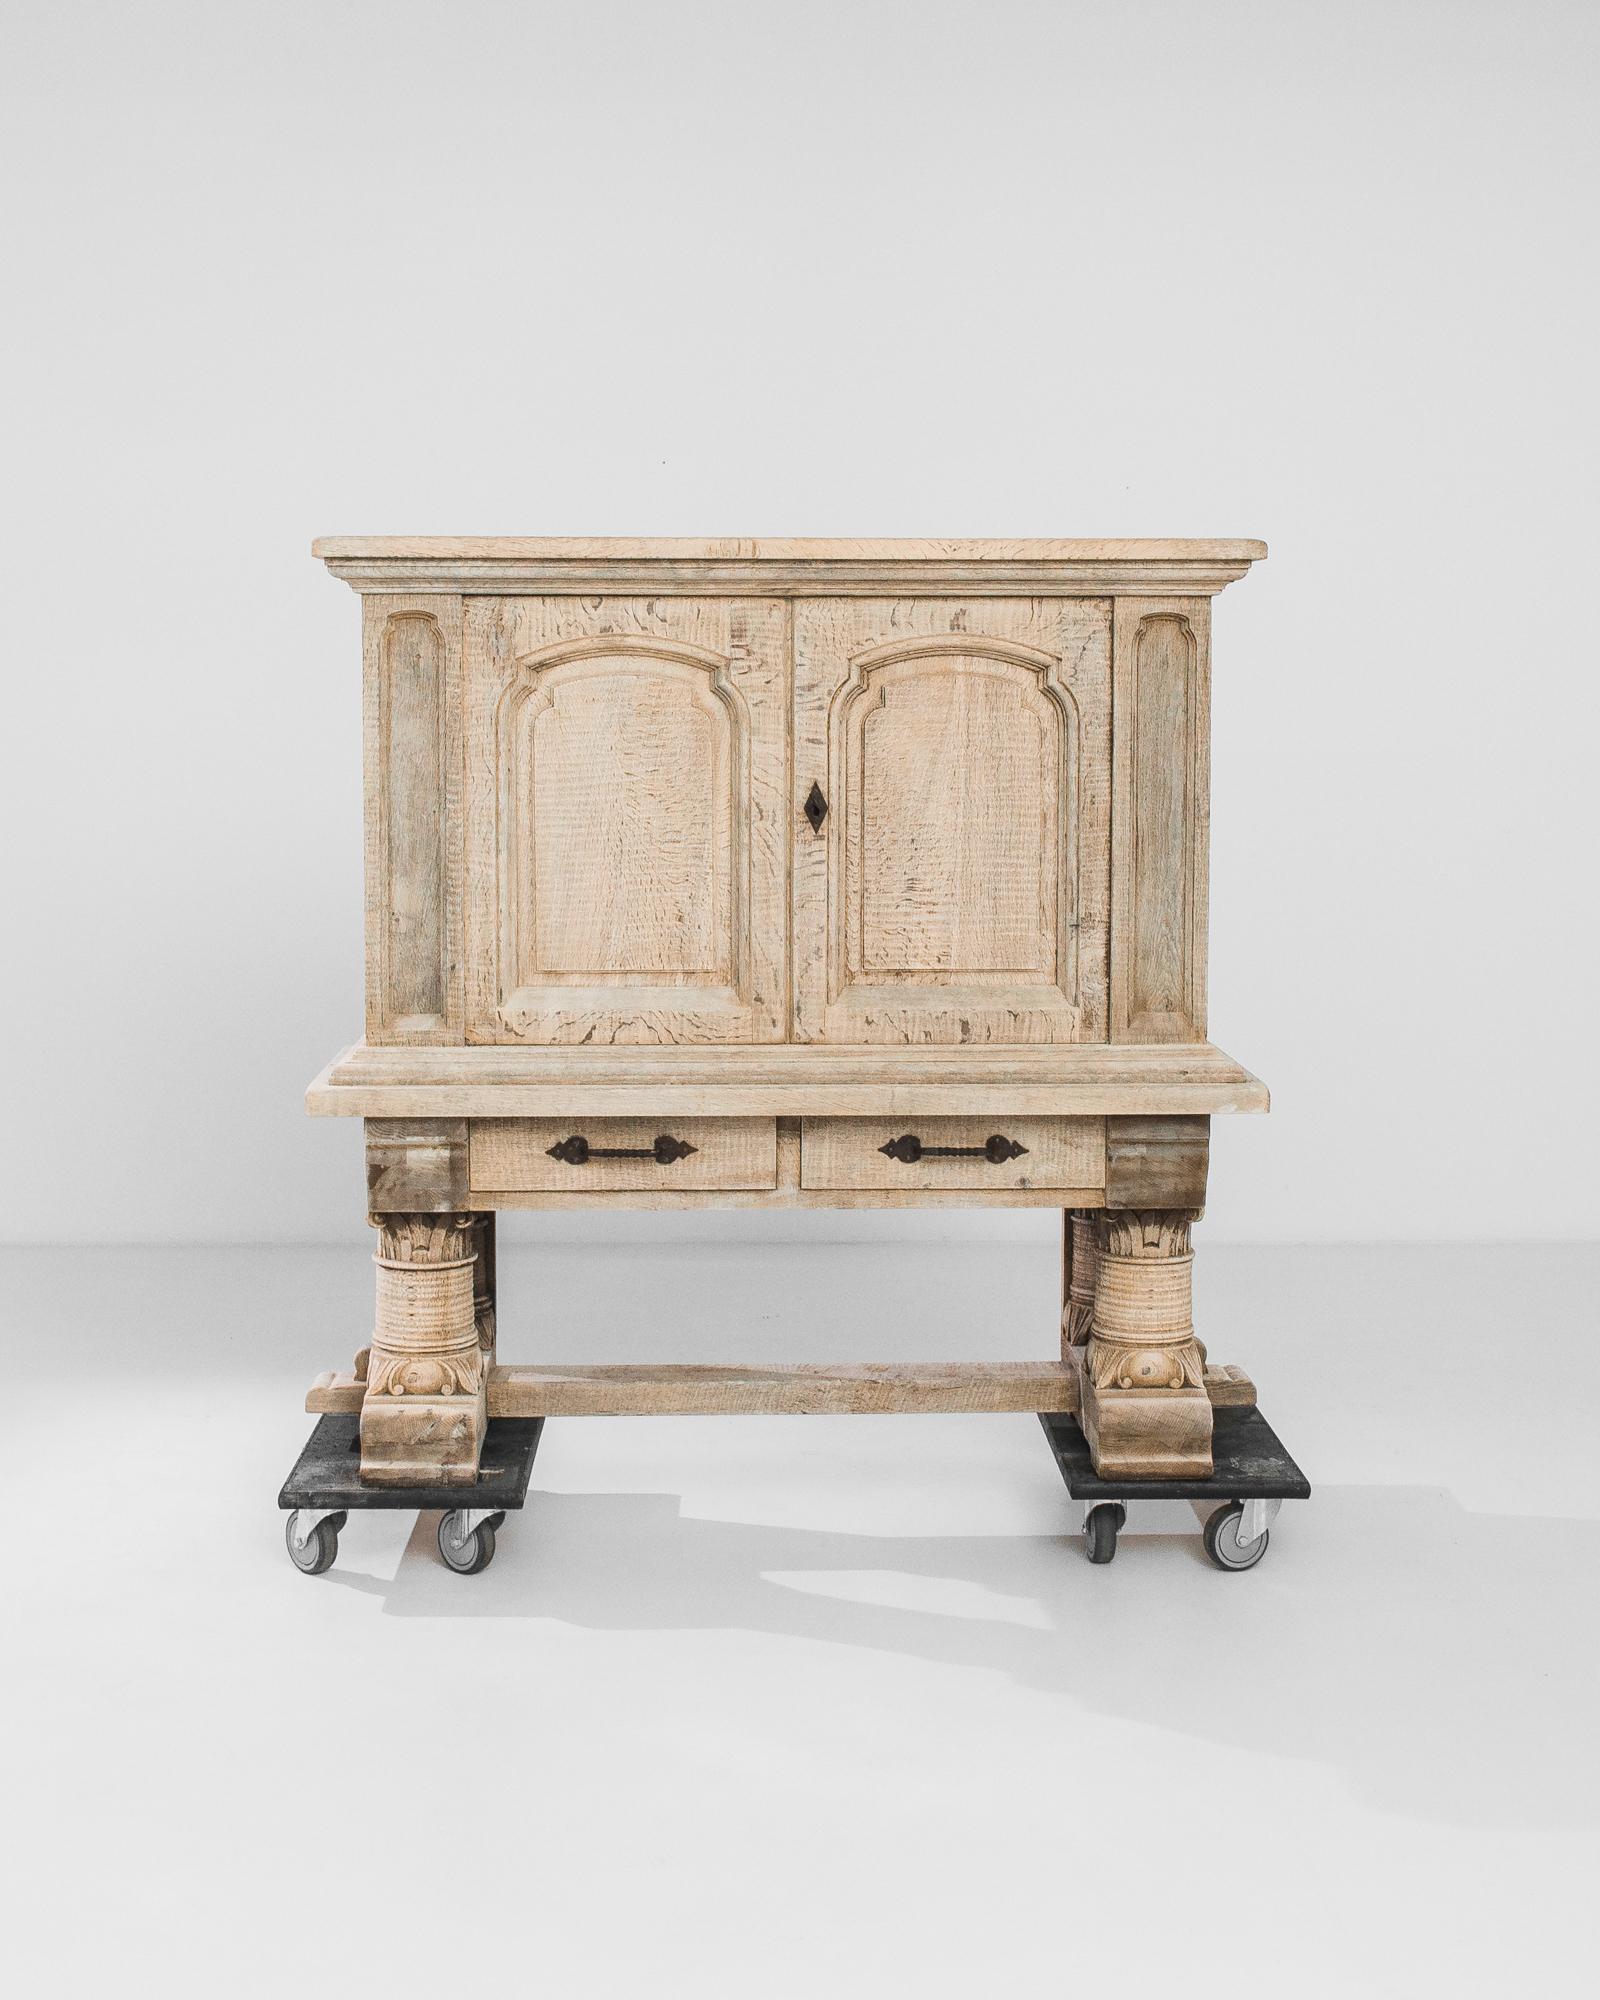 A bleached oak buffet from Belgium, produced circa 1970. Four thick, richly-carved legs with acanthus leaf motifs support a locking, double door, two shelf cabinet featuring two sliding drawers underneath. An arcade of recessed arches across the